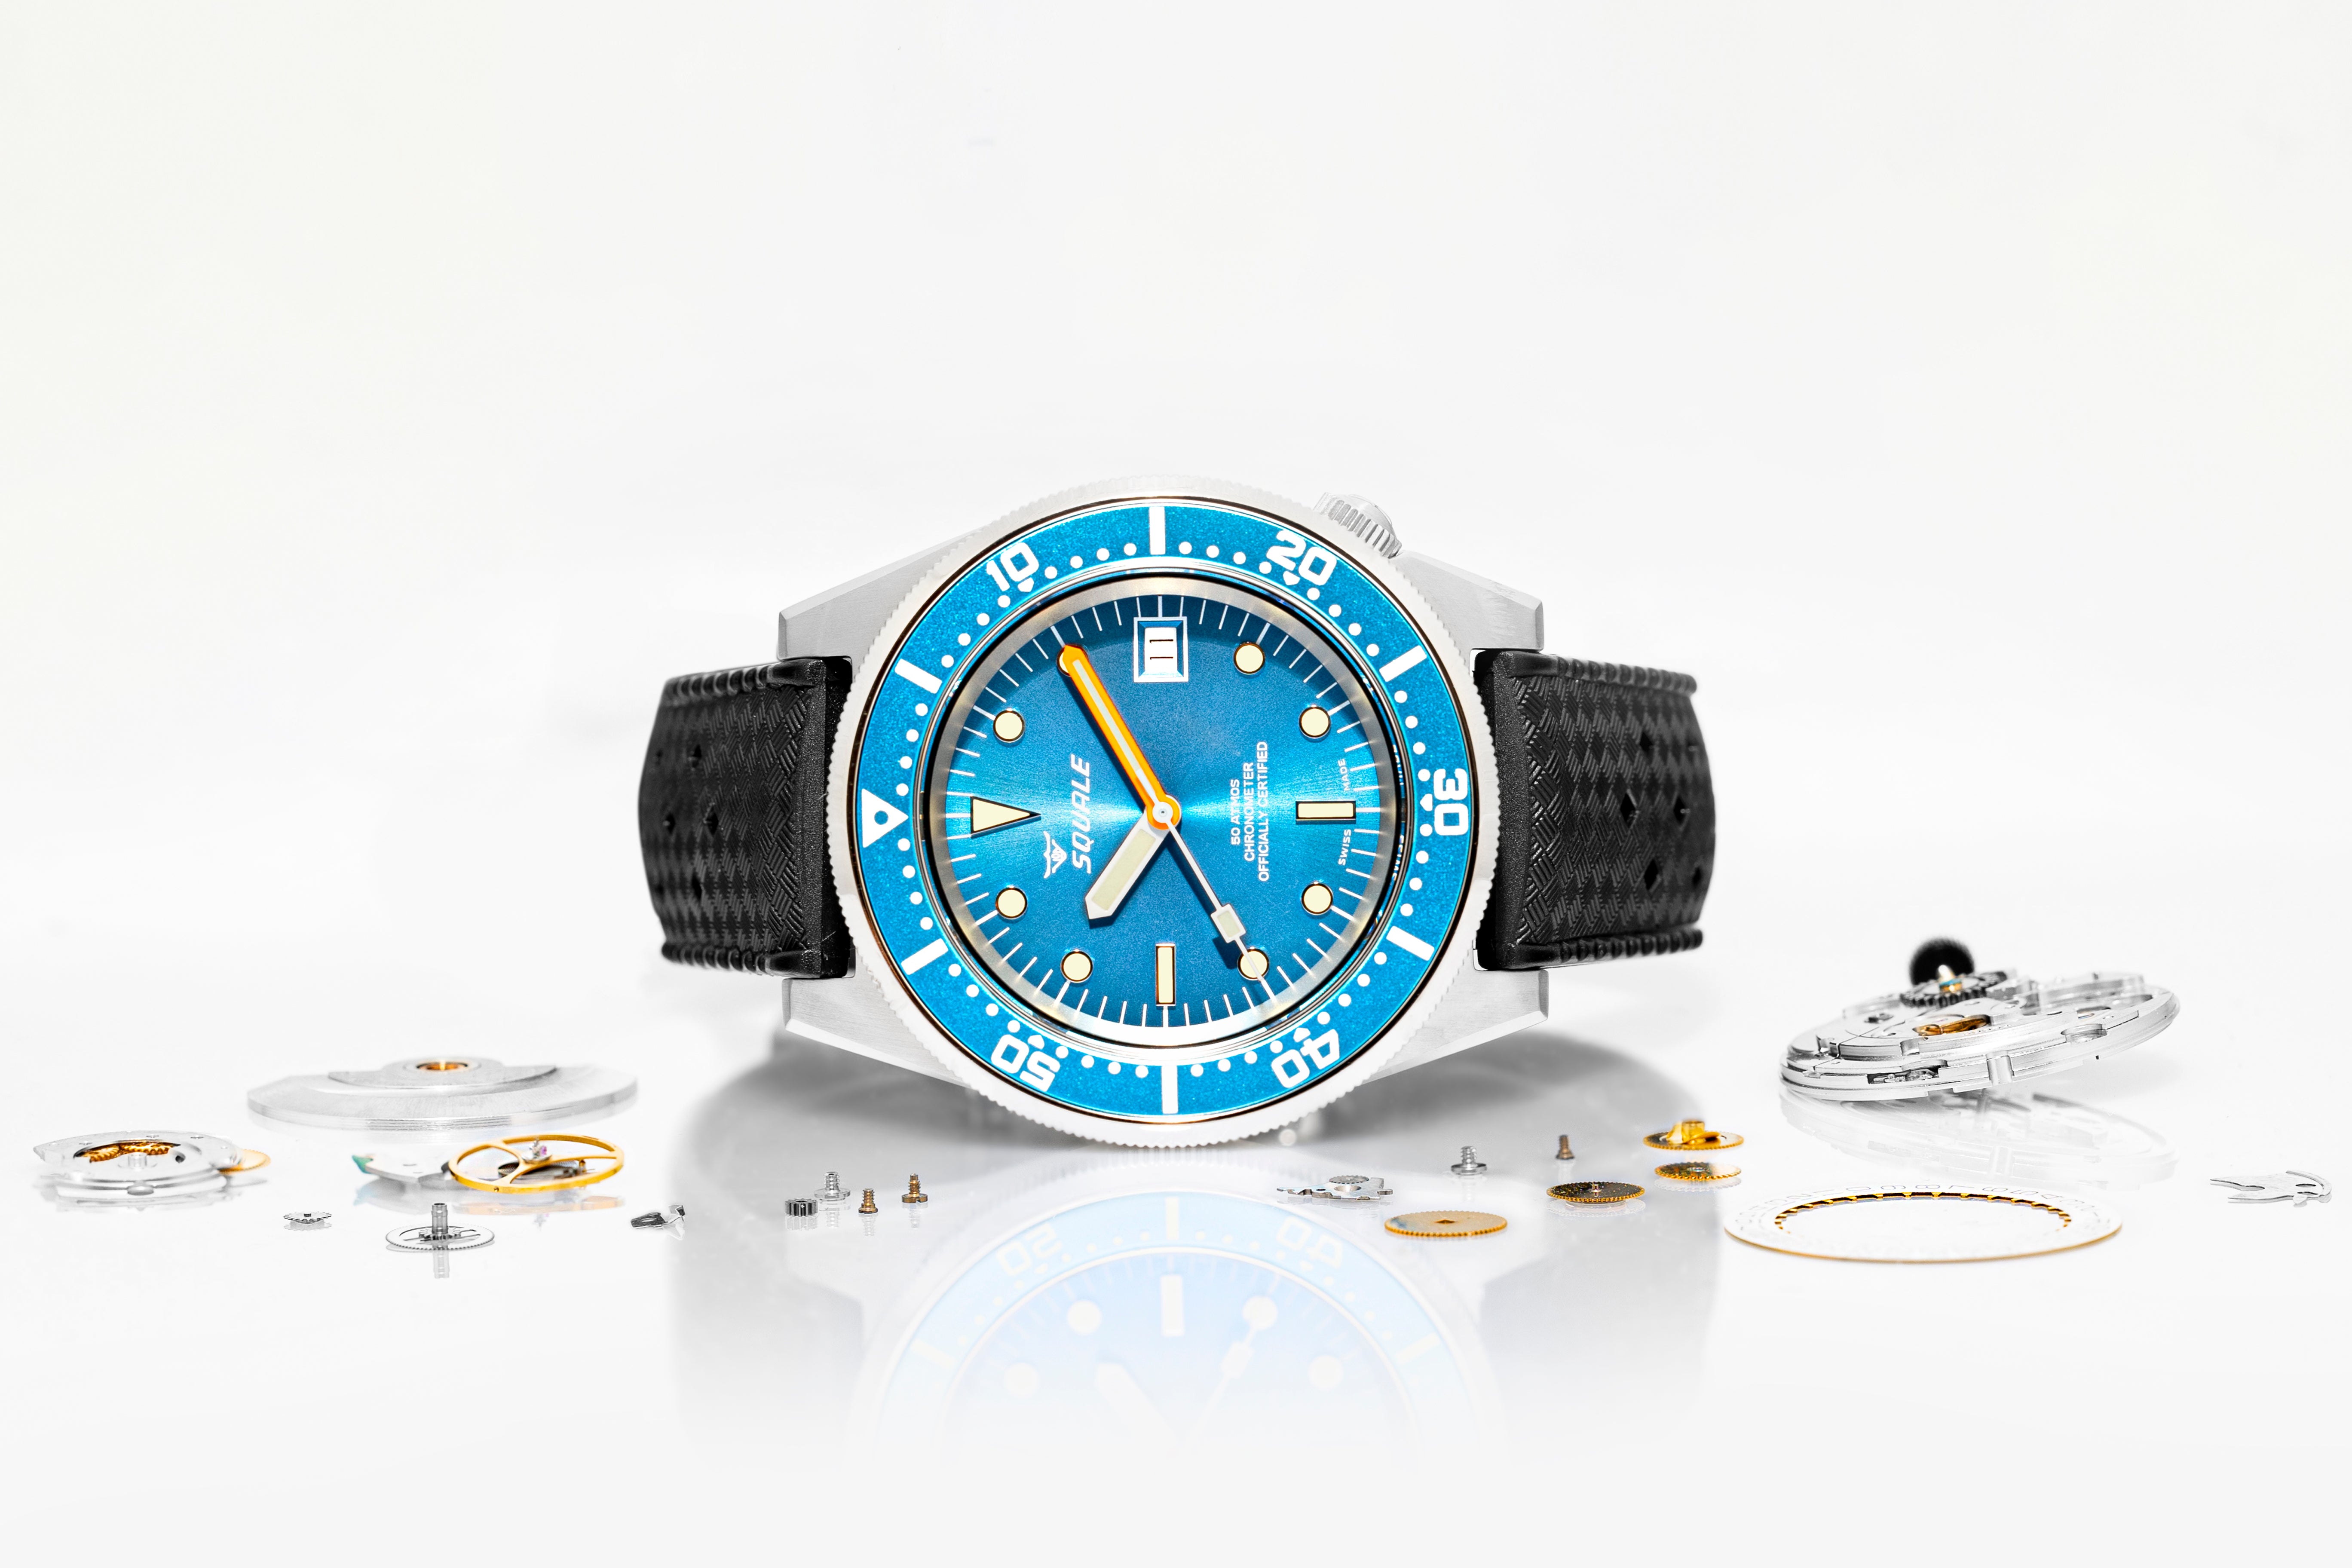 Squale 1521 Swiss Made COSC Diver's Watch - Blue Dial